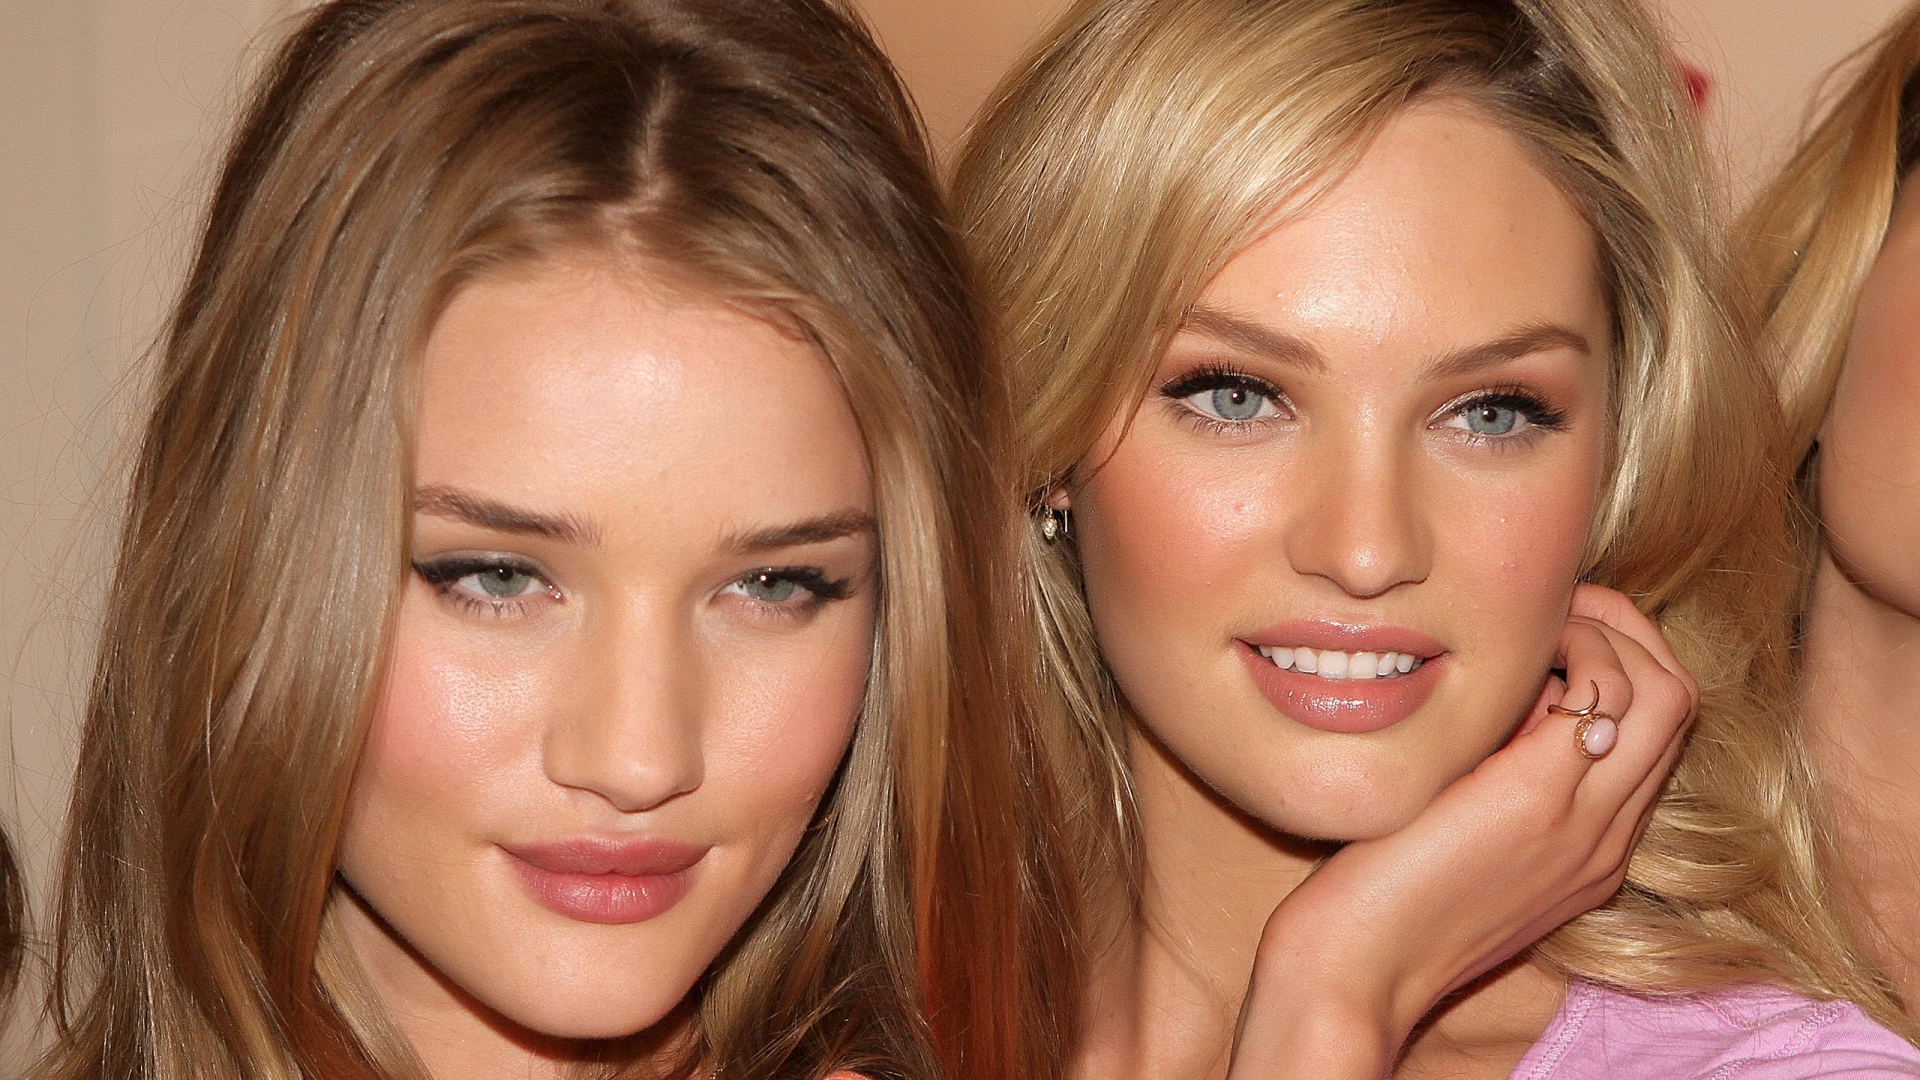 Rosie and Candice for 1920 x 1080 HDTV 1080p resolution